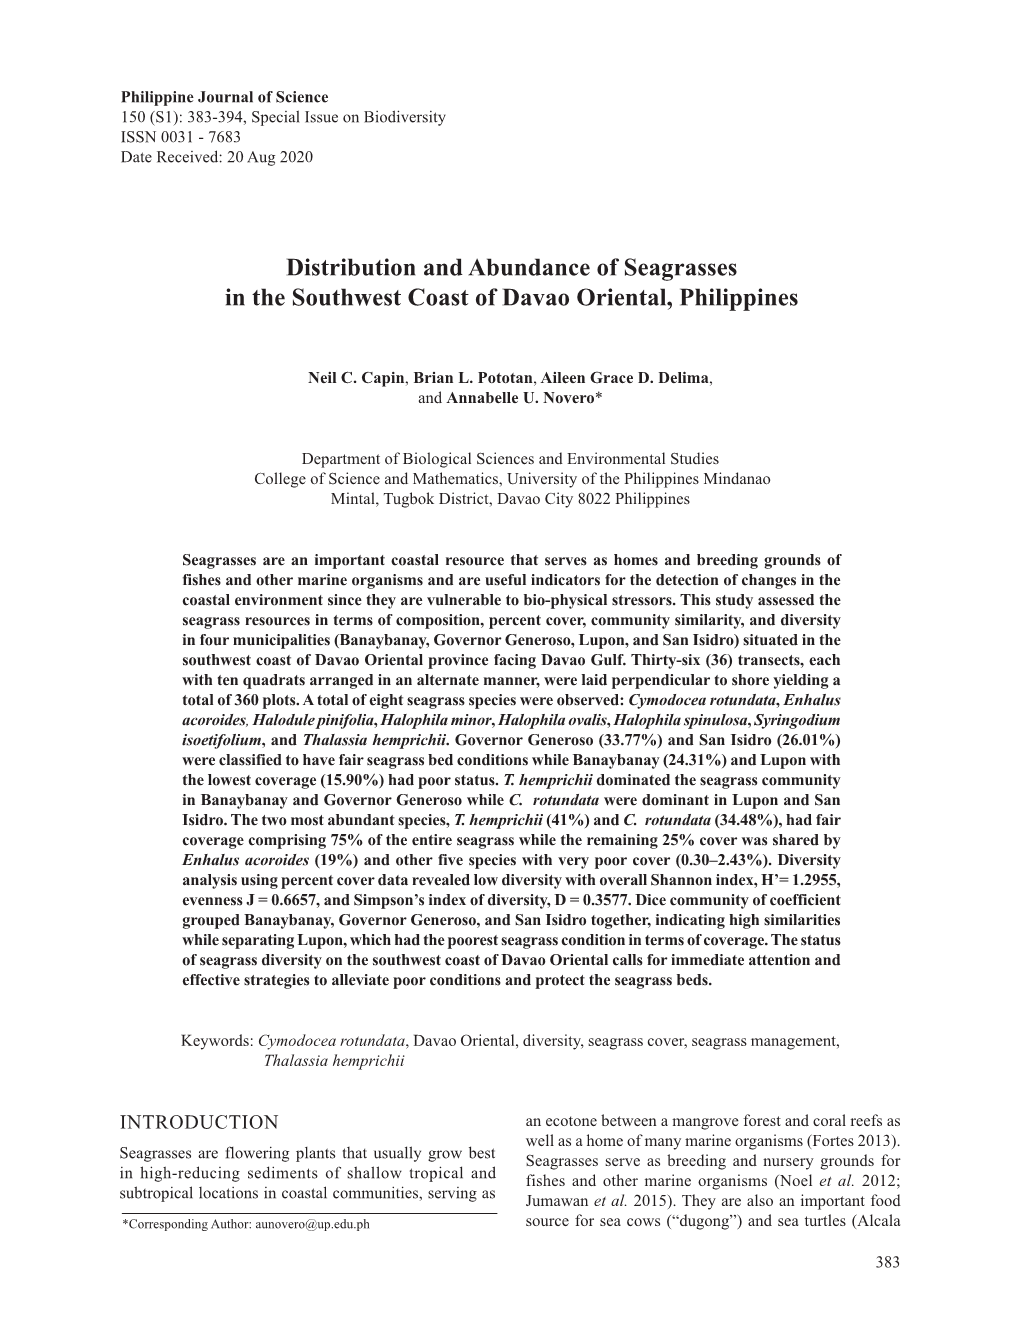 Distribution and Abundance of Seagrasses in the Southwest Coast of Davao Oriental, Philippines